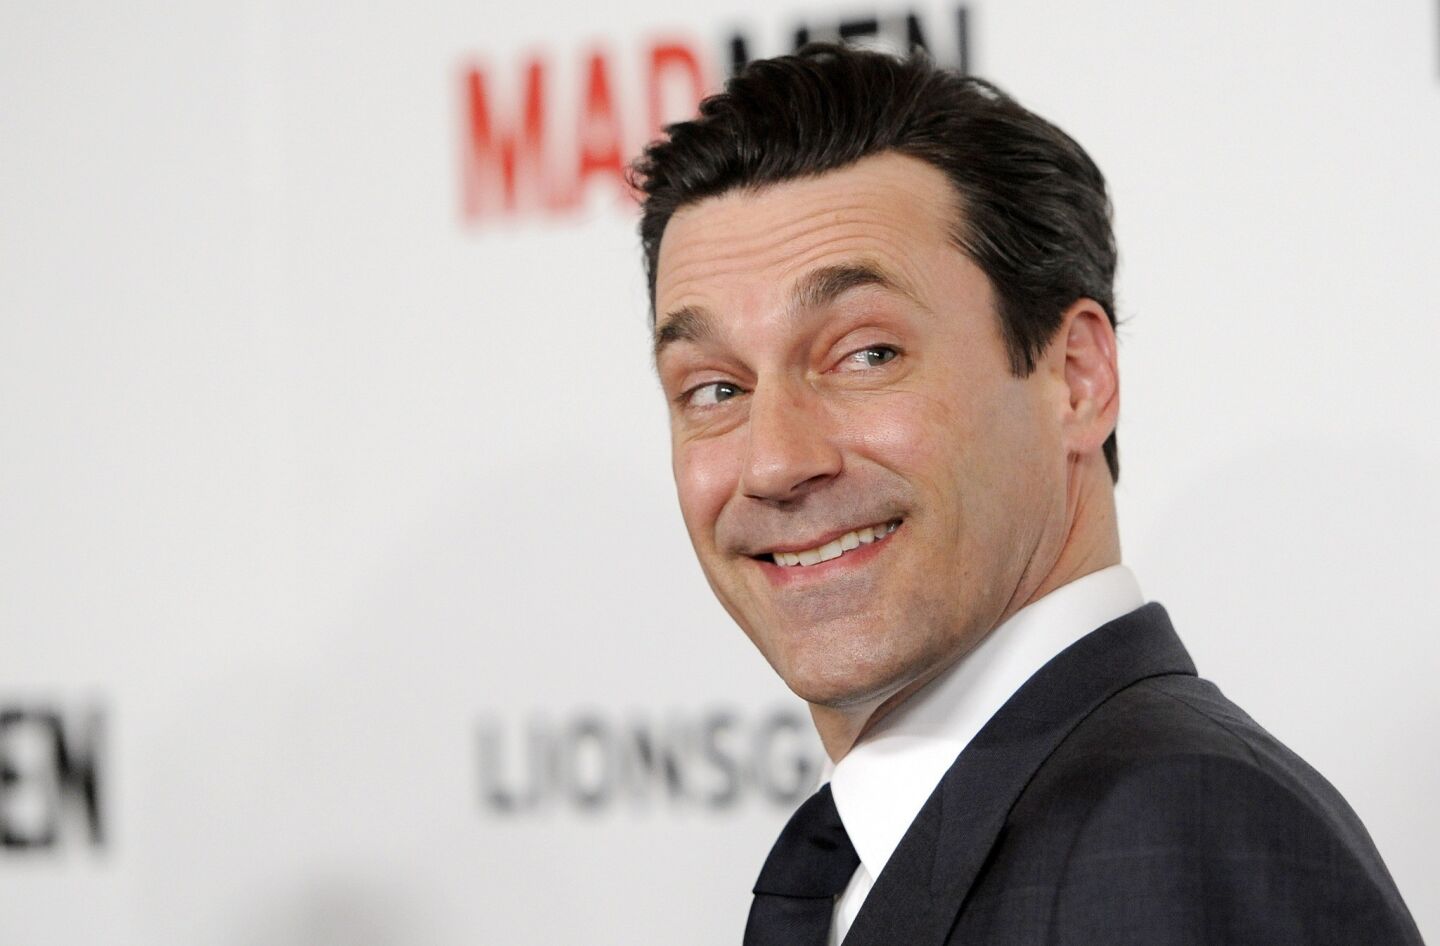 The AMC series revolves around Jon Hamm's Don Draper, a promiscuous Madison Avenue ad exec, and is set in the 1960s. The Season 5 finale left off with Don experiencing guilt over his indirect contribution to the deaths of both his brother Adam and an ad exec named Lane.